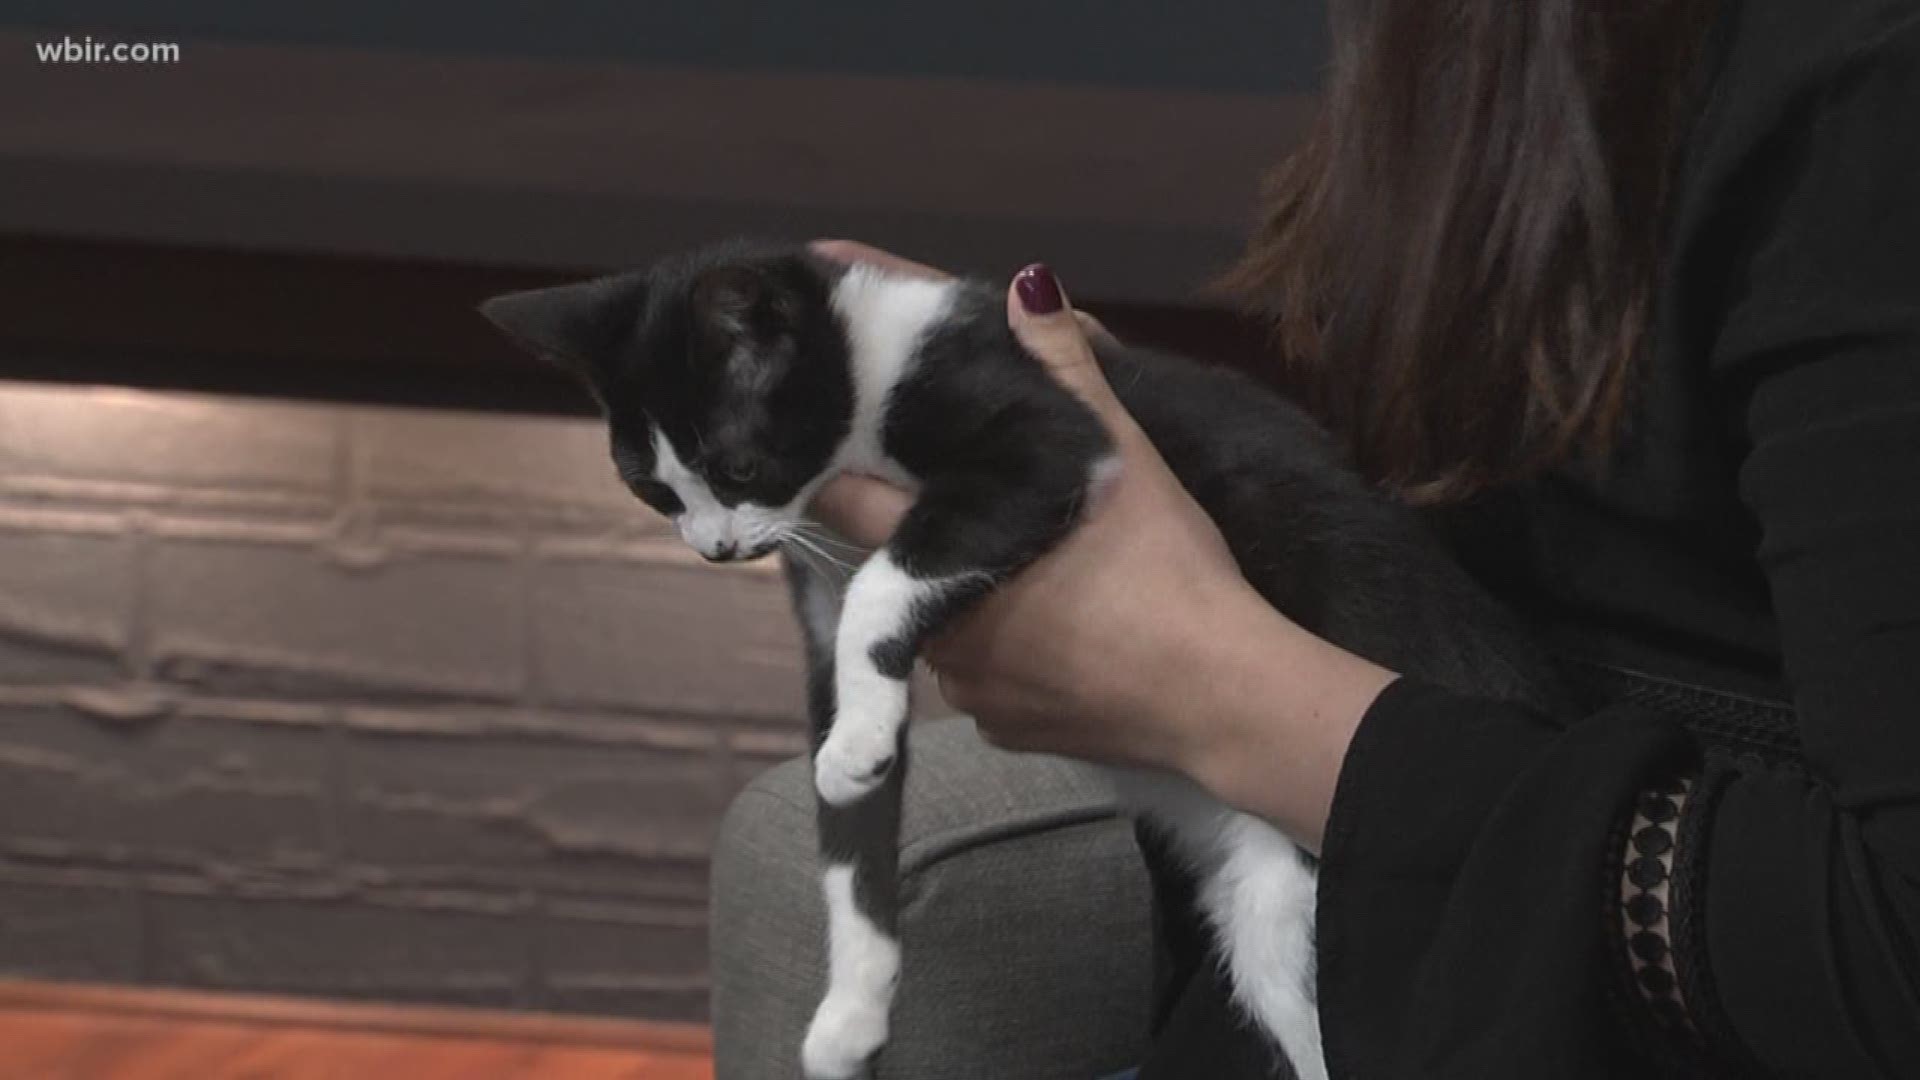 Courtney Kliman with Young Williams Animal Center has an adoptable pet!